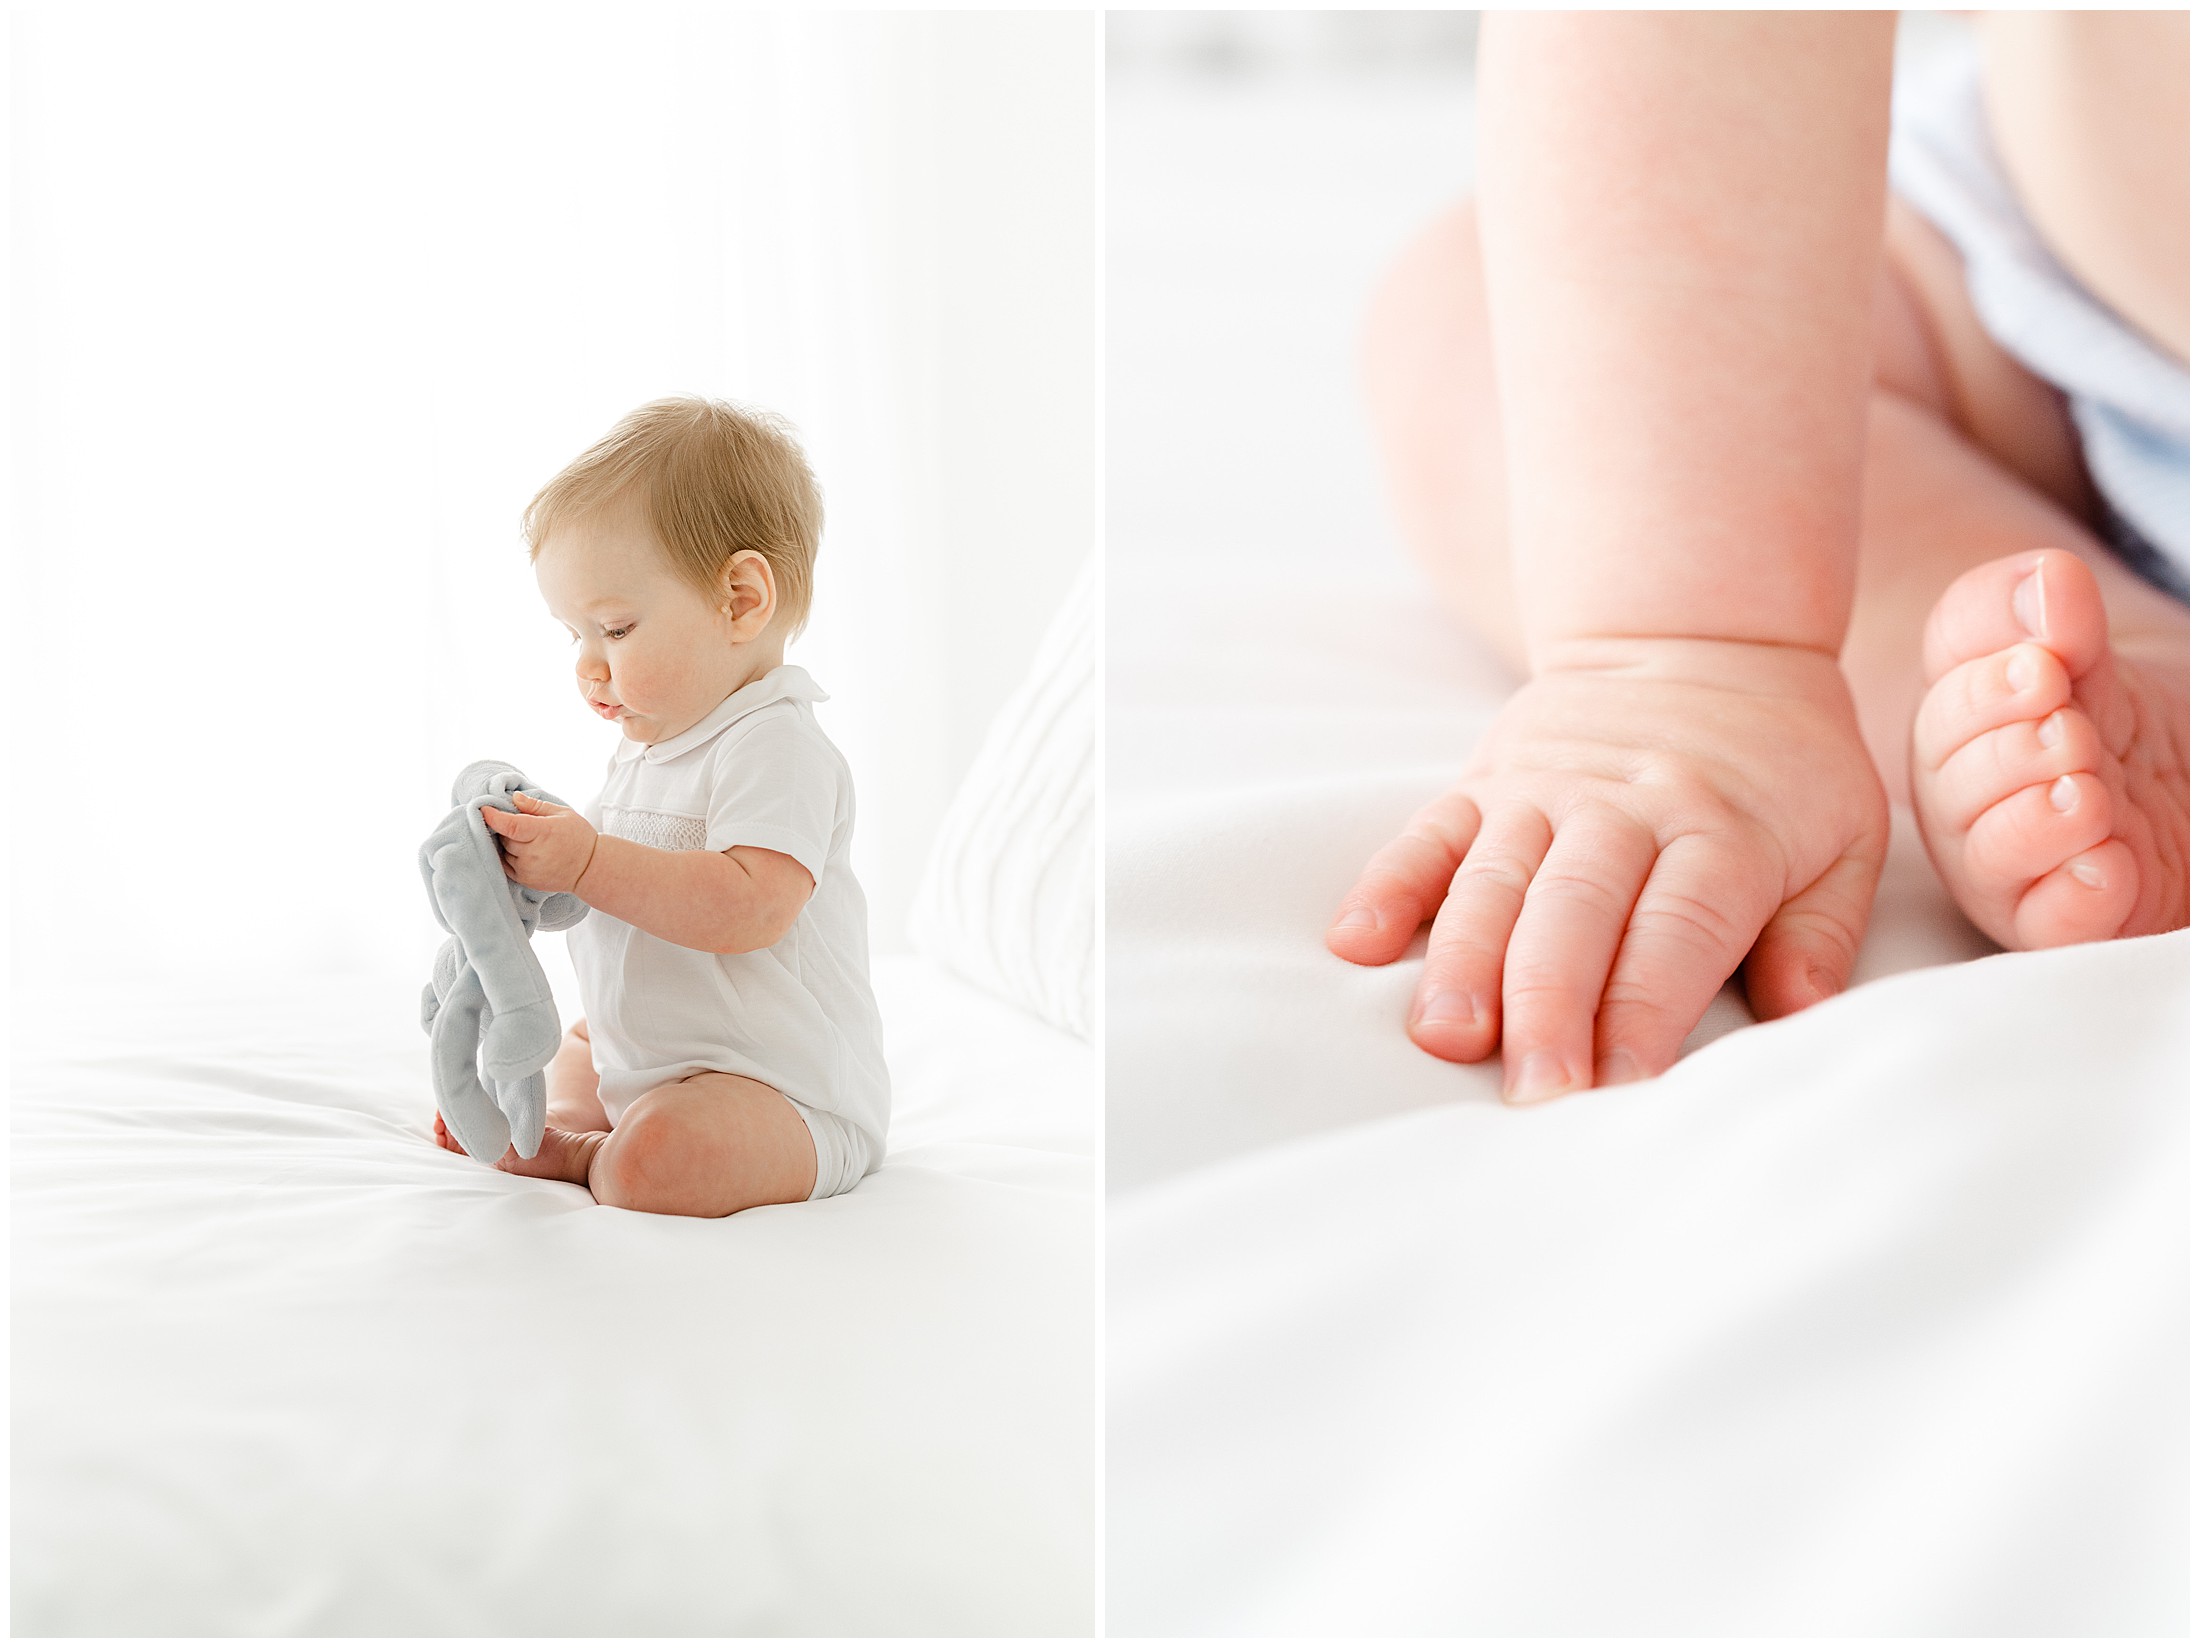 A photo of a baby sitting and looking at a stuffed bear and a close up photo of a baby's hand.